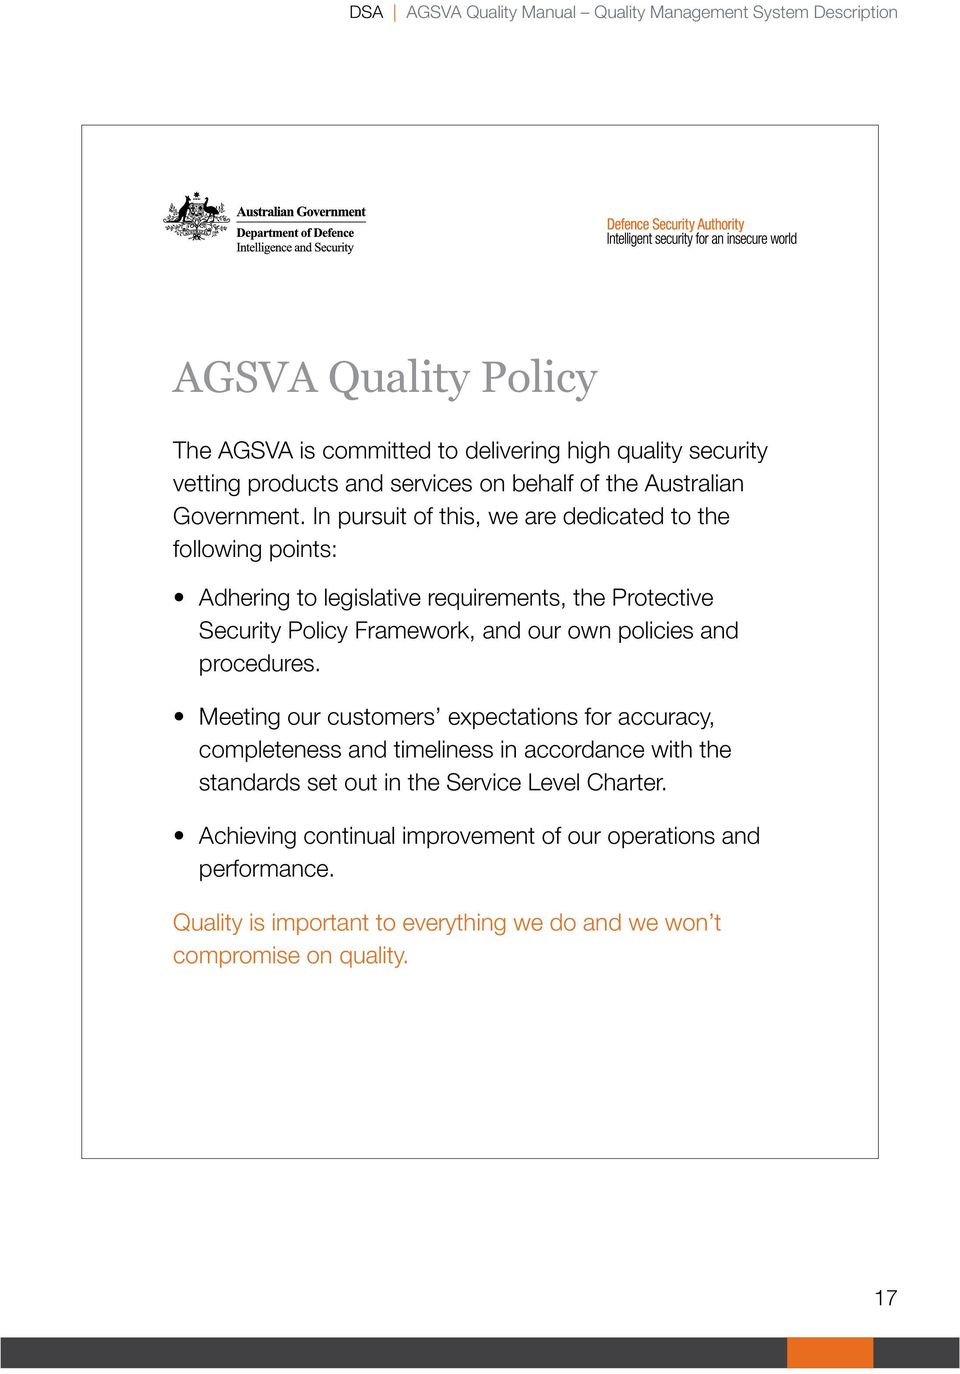 The AGSVA Improvement Suggestion Program Meeting our customers expectations for accuracy, completeness and timeliness in accordance with the standards set out in the Service Level Charter.